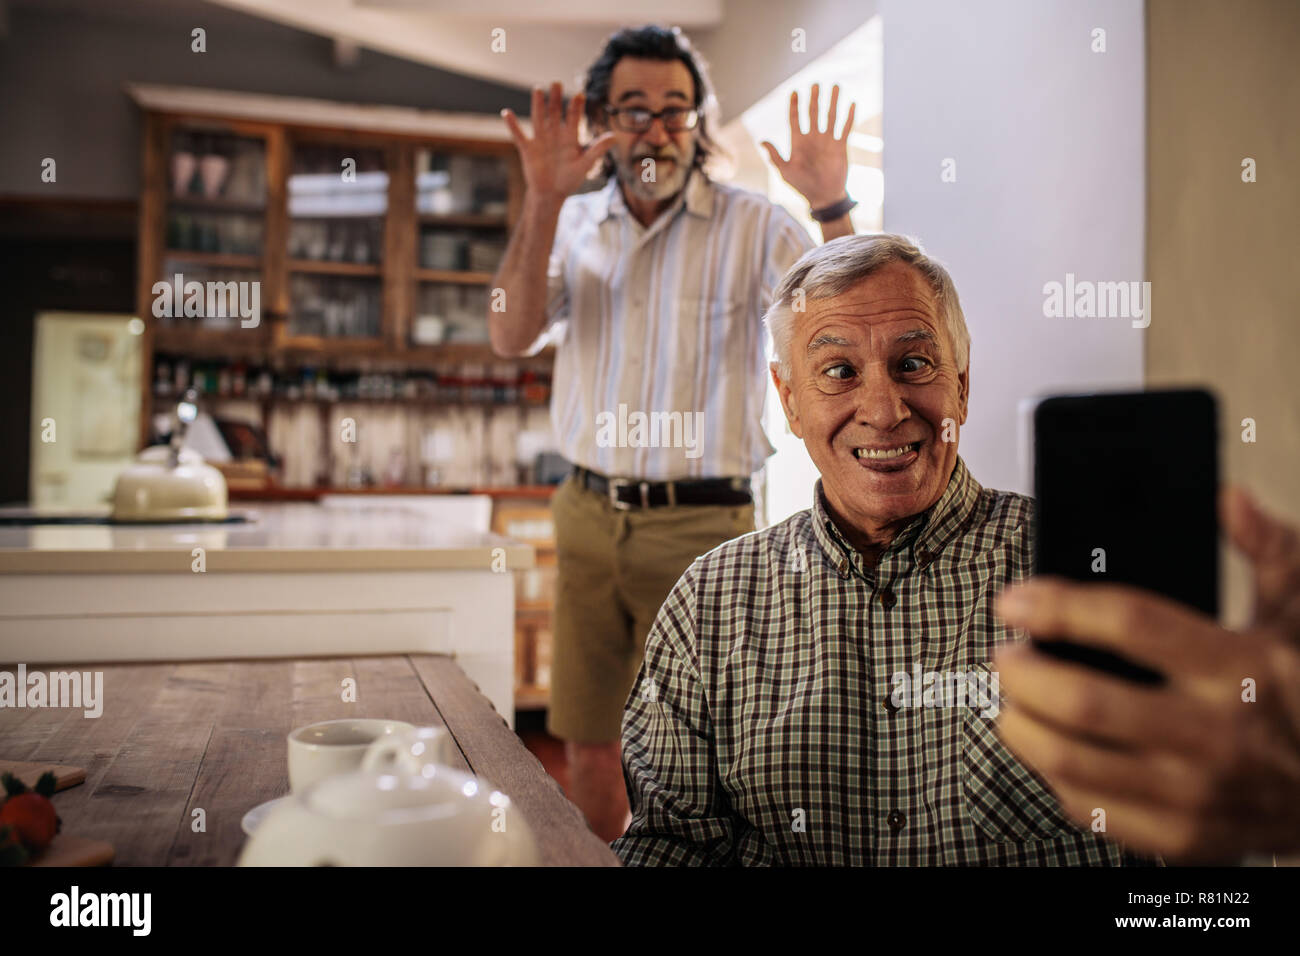 Funny senior man taking selfie with friend standing at back making hand gestures. Retired man making funny face while taking a self portrait with smar Stock Photo